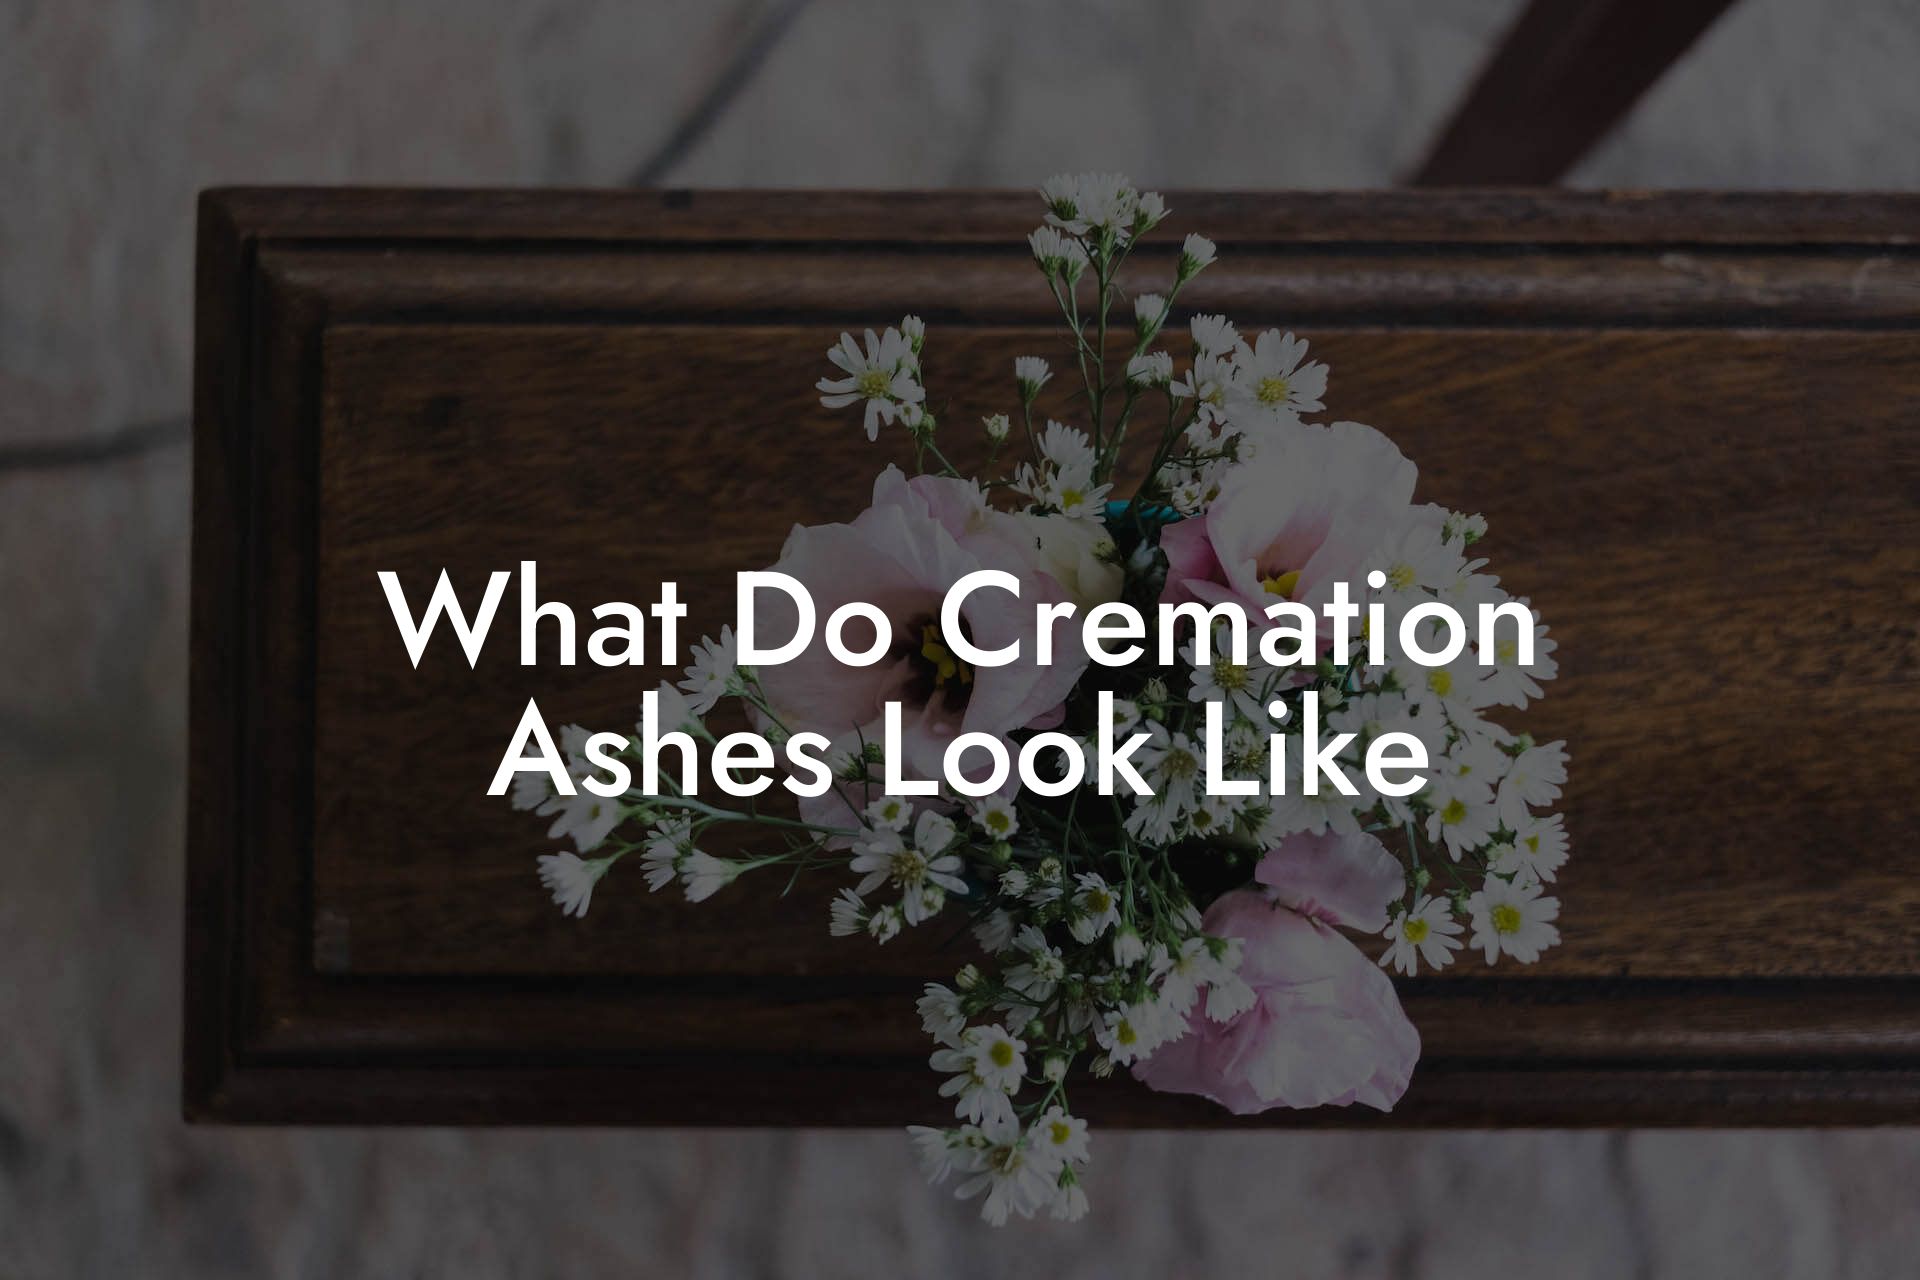 What Do Cremation Ashes Look Like